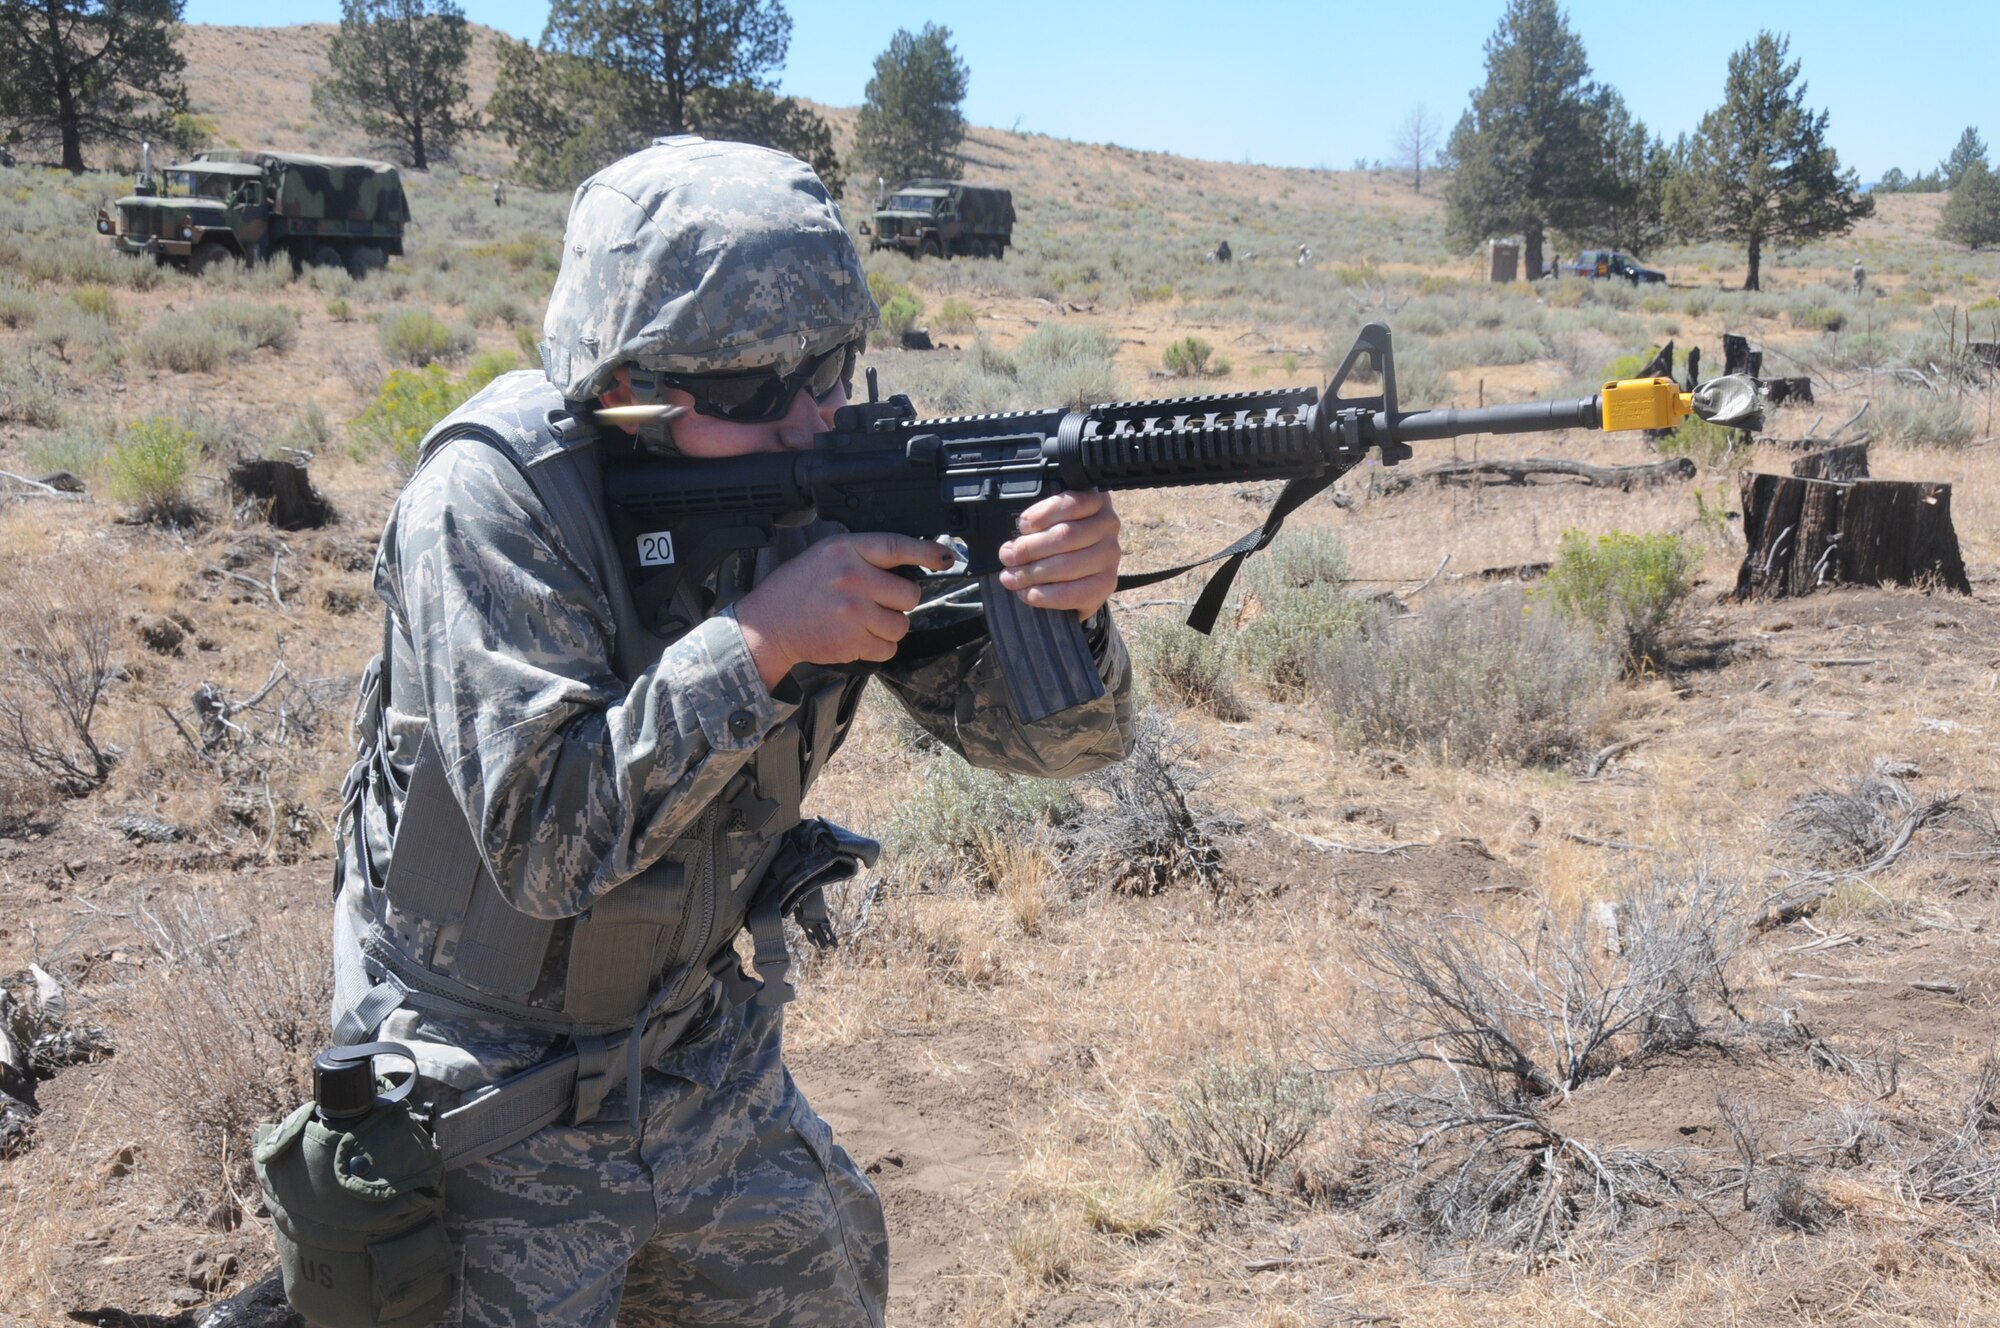 U.S. Air Force 1st Lt. Daniel Dierickx of the 270th Air Traffic Control Squadron fires blanks after completing an exercise to hone base defense skills near Bonanza, Oregon on public land, July 26, 2014. The 270th Air Traffic Control Squadron controls the airspace for the 173rd Fighter Wing as well as civilian aircraft at Kingsley Field but also has an expeditionary tasking. This year’s annual training emphasized that capability and involved several exercises off base. (U.S. Air National Guard photo by Tech. Sgt. Jefferson Thompson/Released)